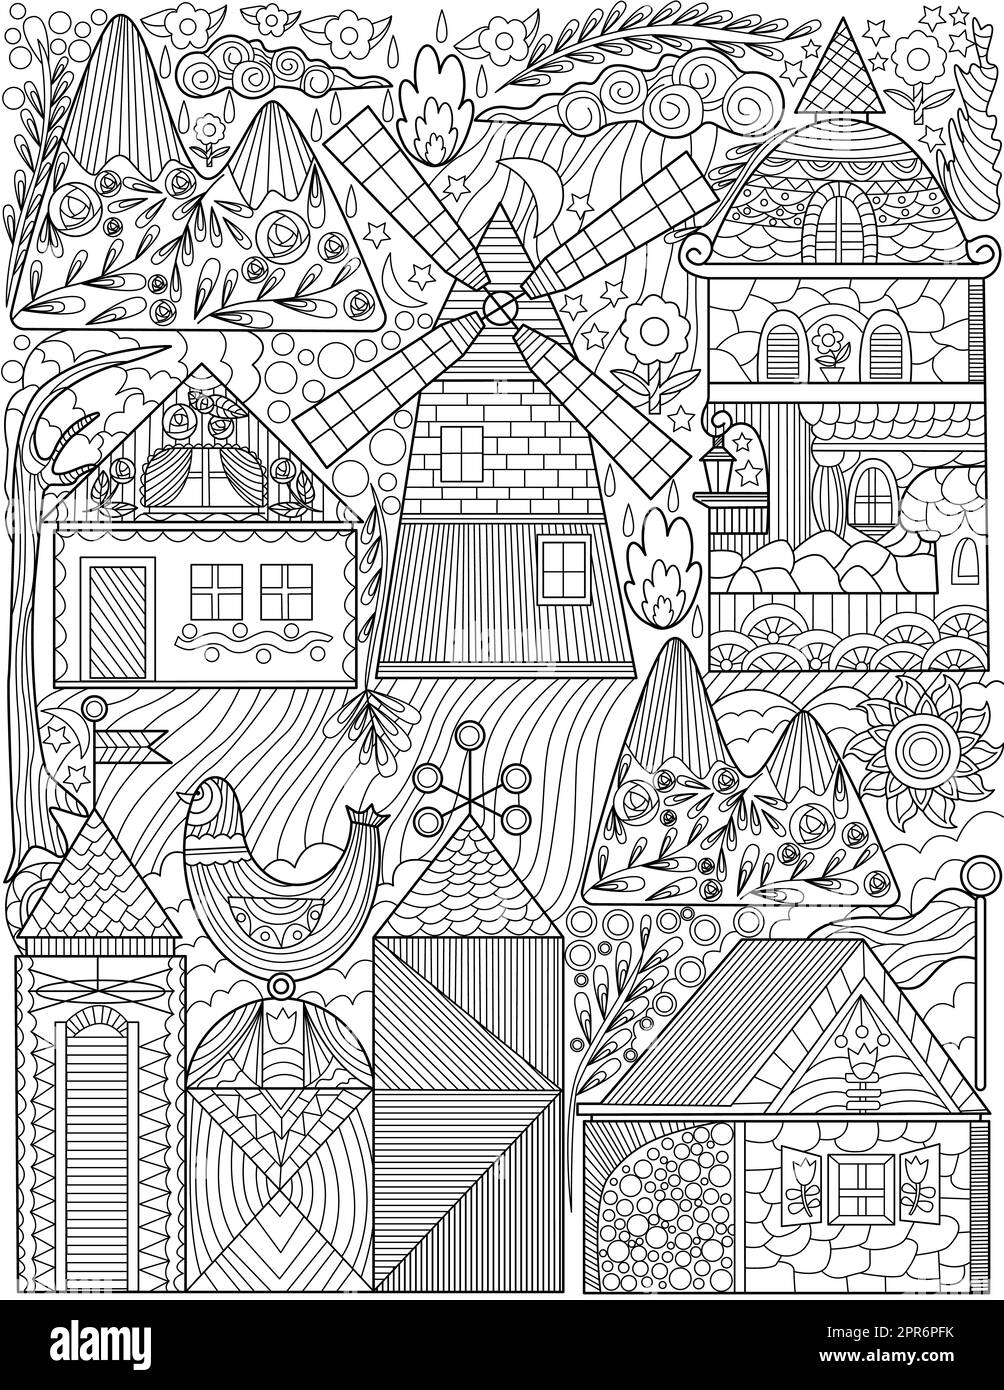 Flowers & Gems: Greyscale Adult Coloring Book, spiral bound coloring book,single